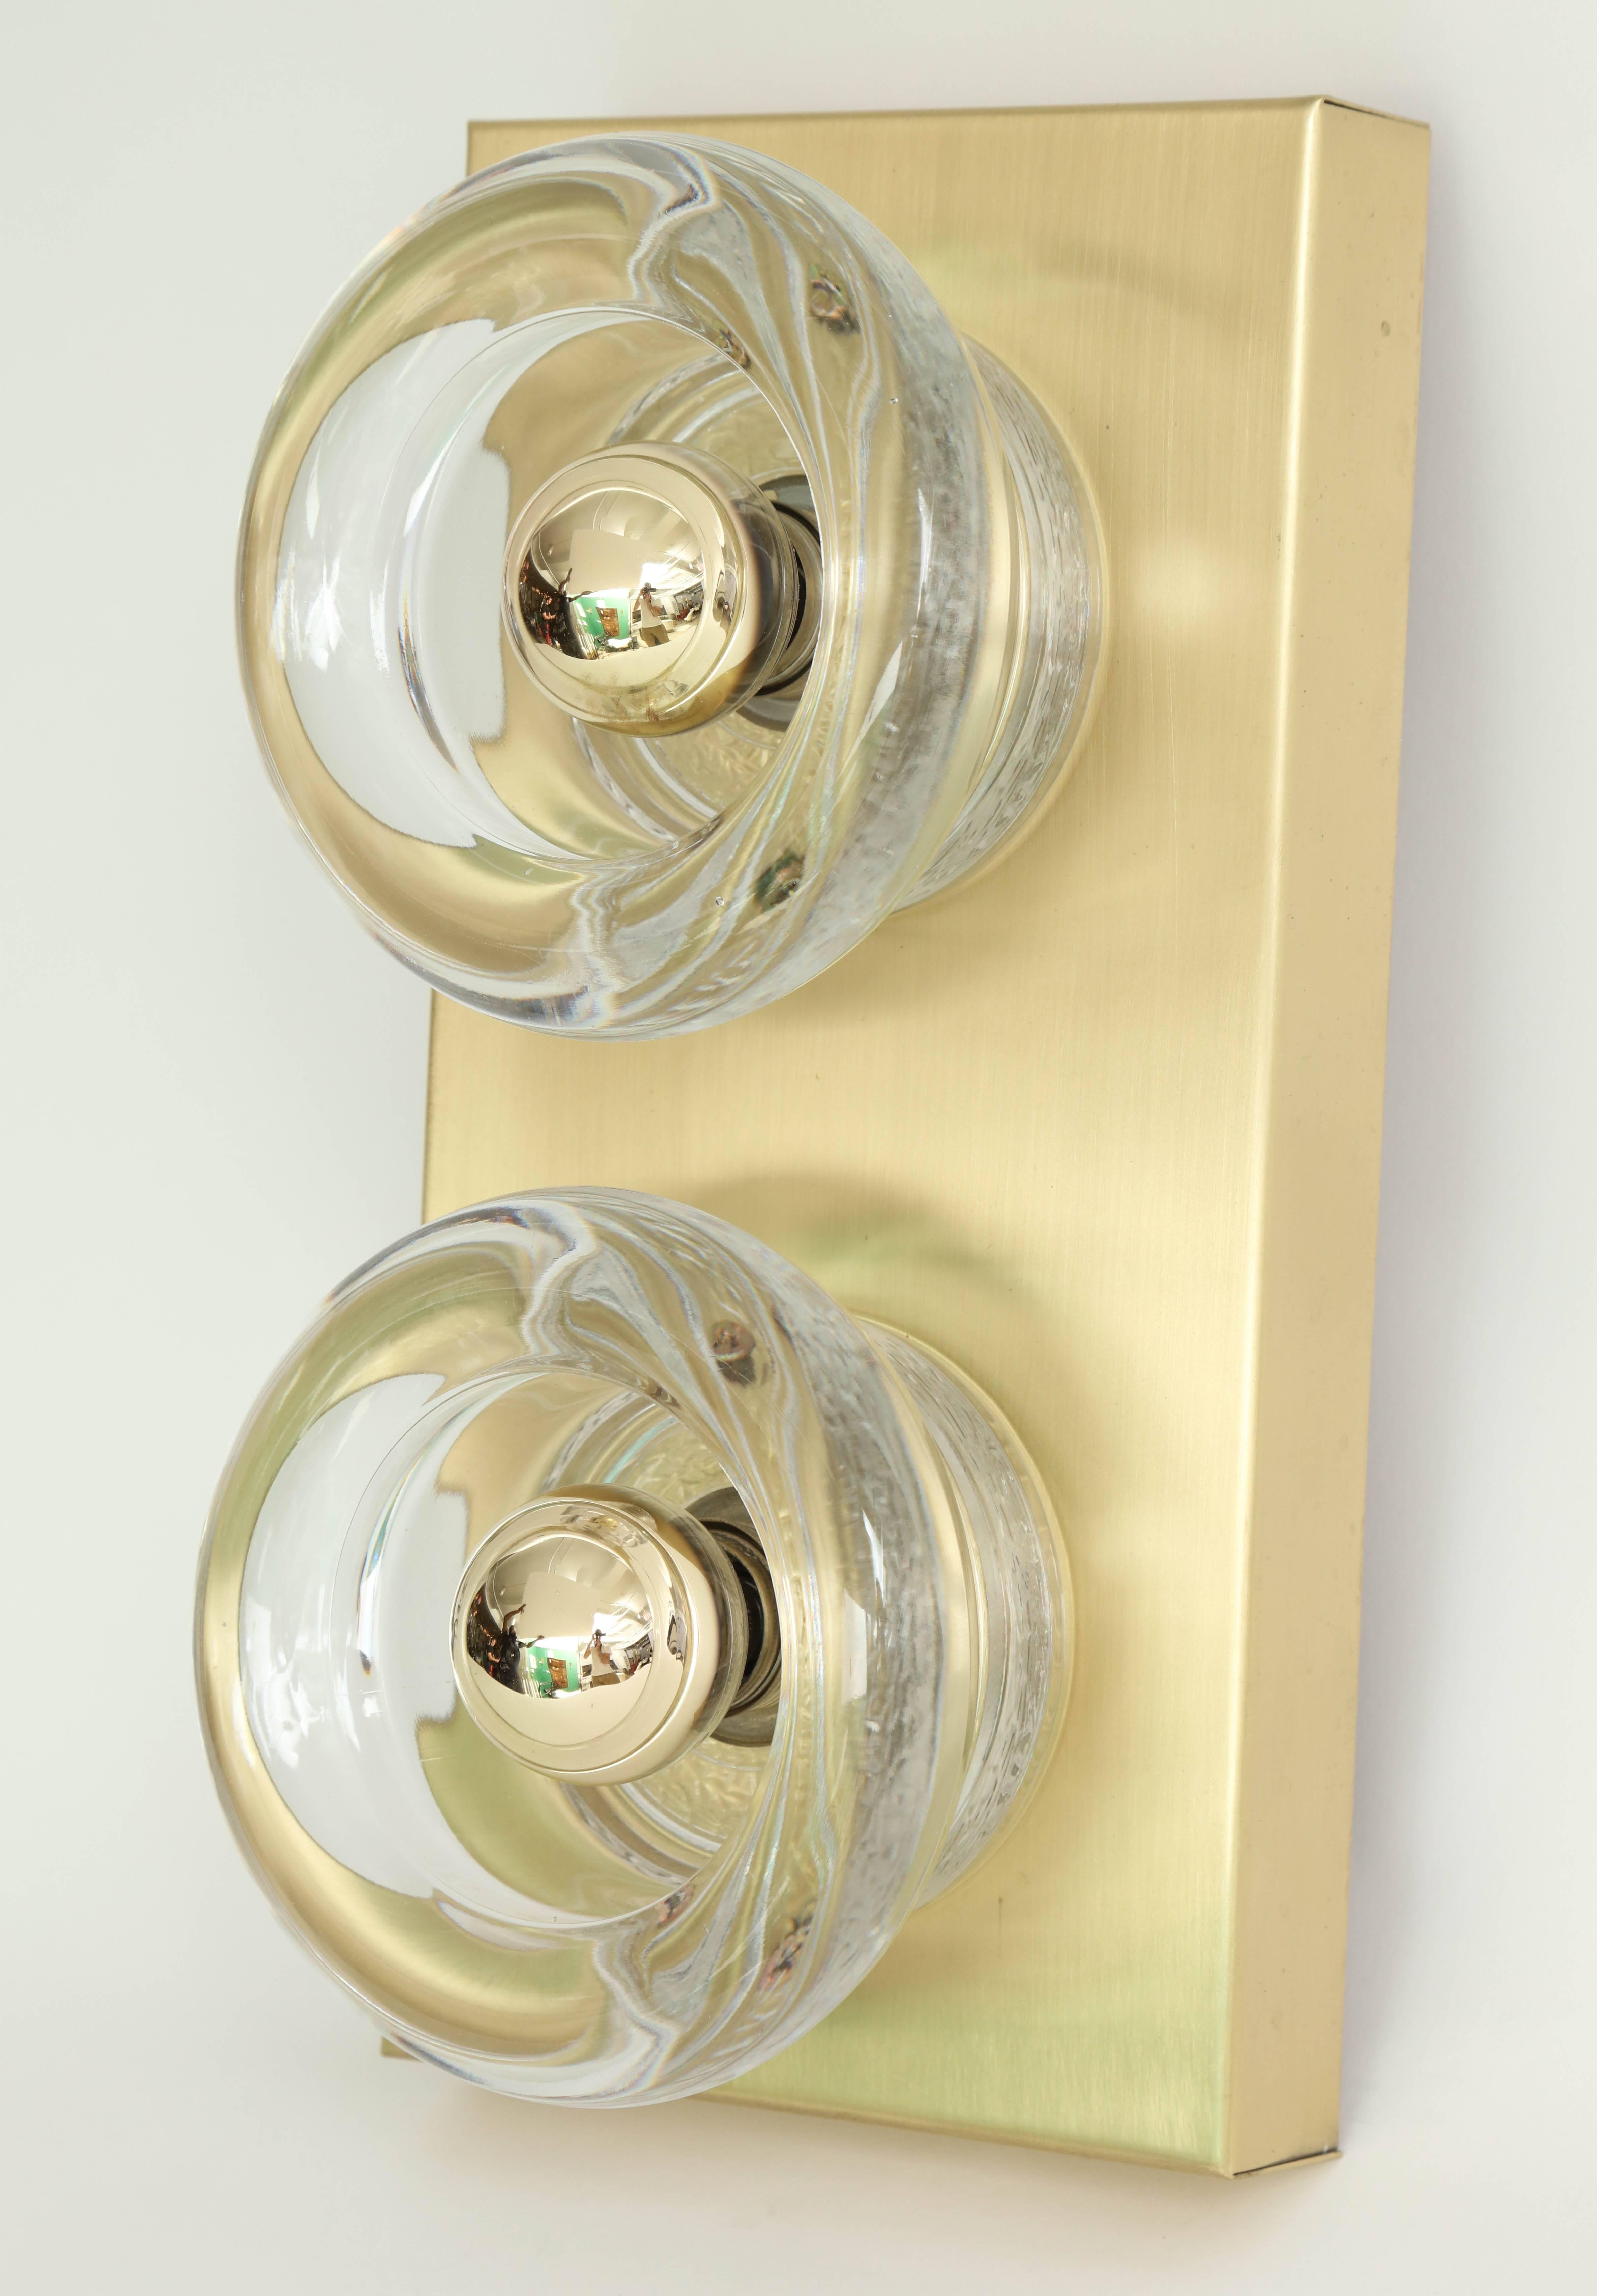 Pair of Mid-Century Italian Classic sconces composed of brushed brass back plates and two molded glass elements by Gaetano Sciolari. Rewired for use in the USA.